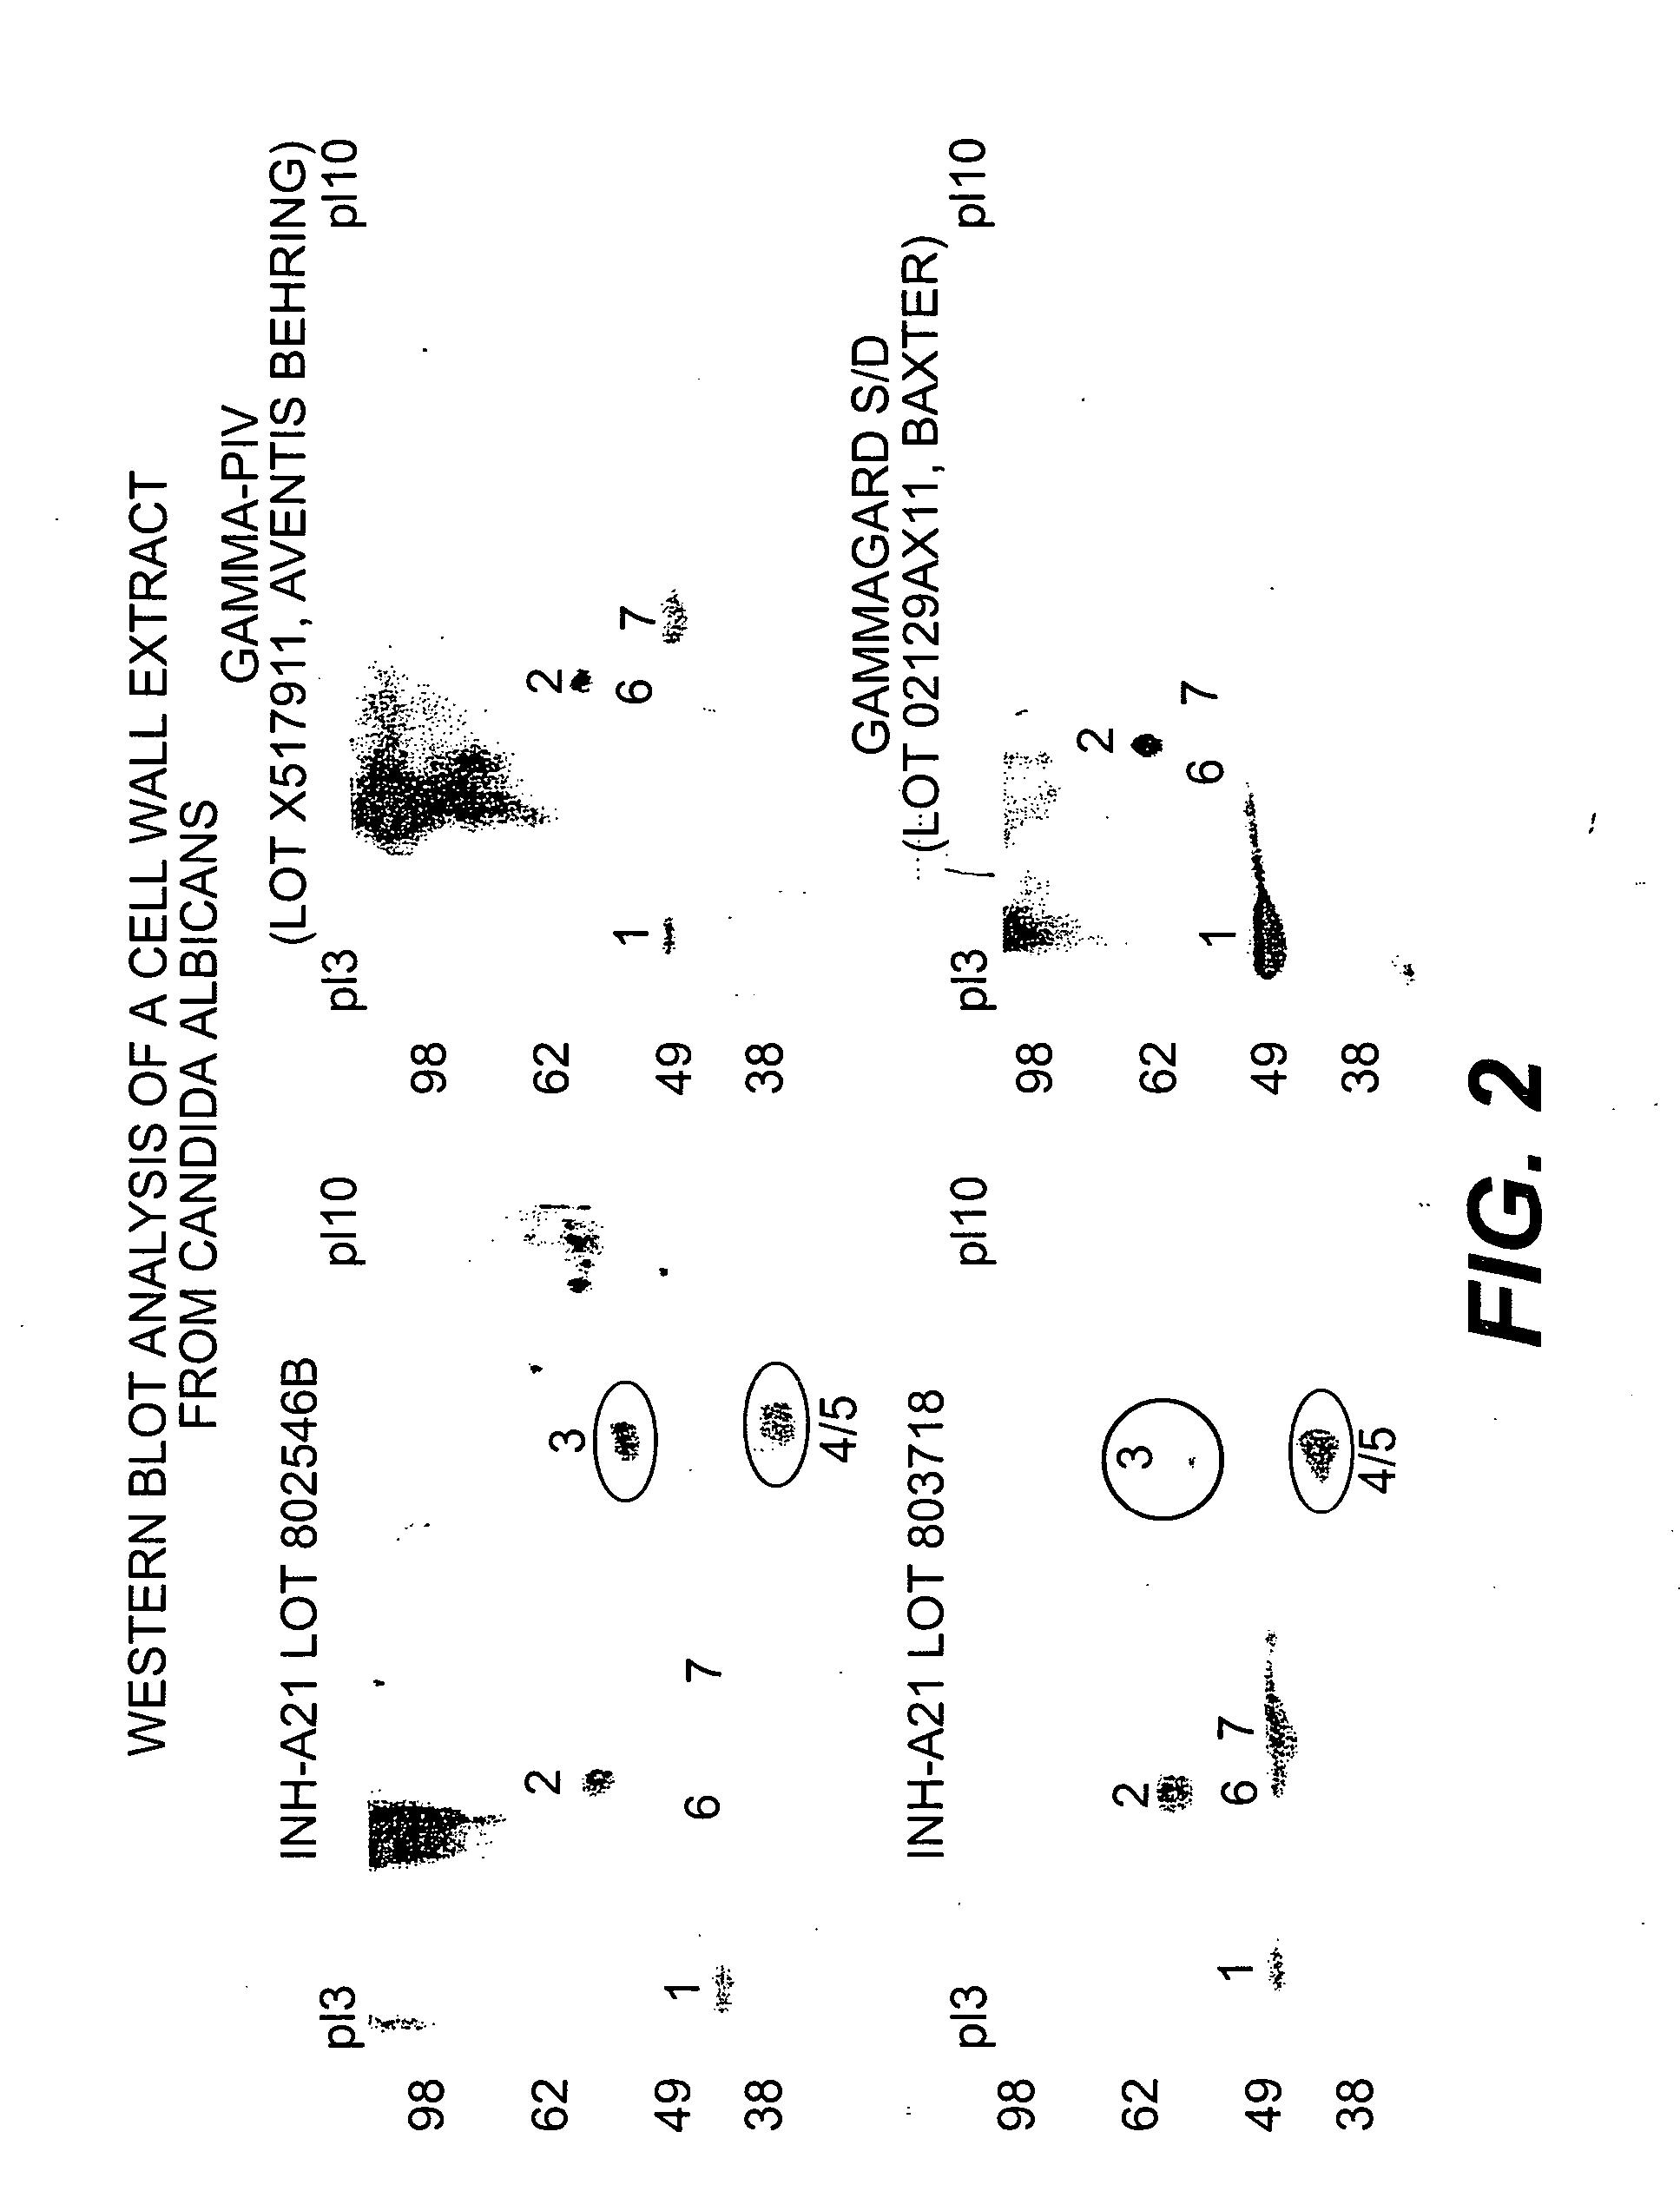 Method of inhibiting Candida-related infections using donor selected or donor stimulated immunoglobulin compositions